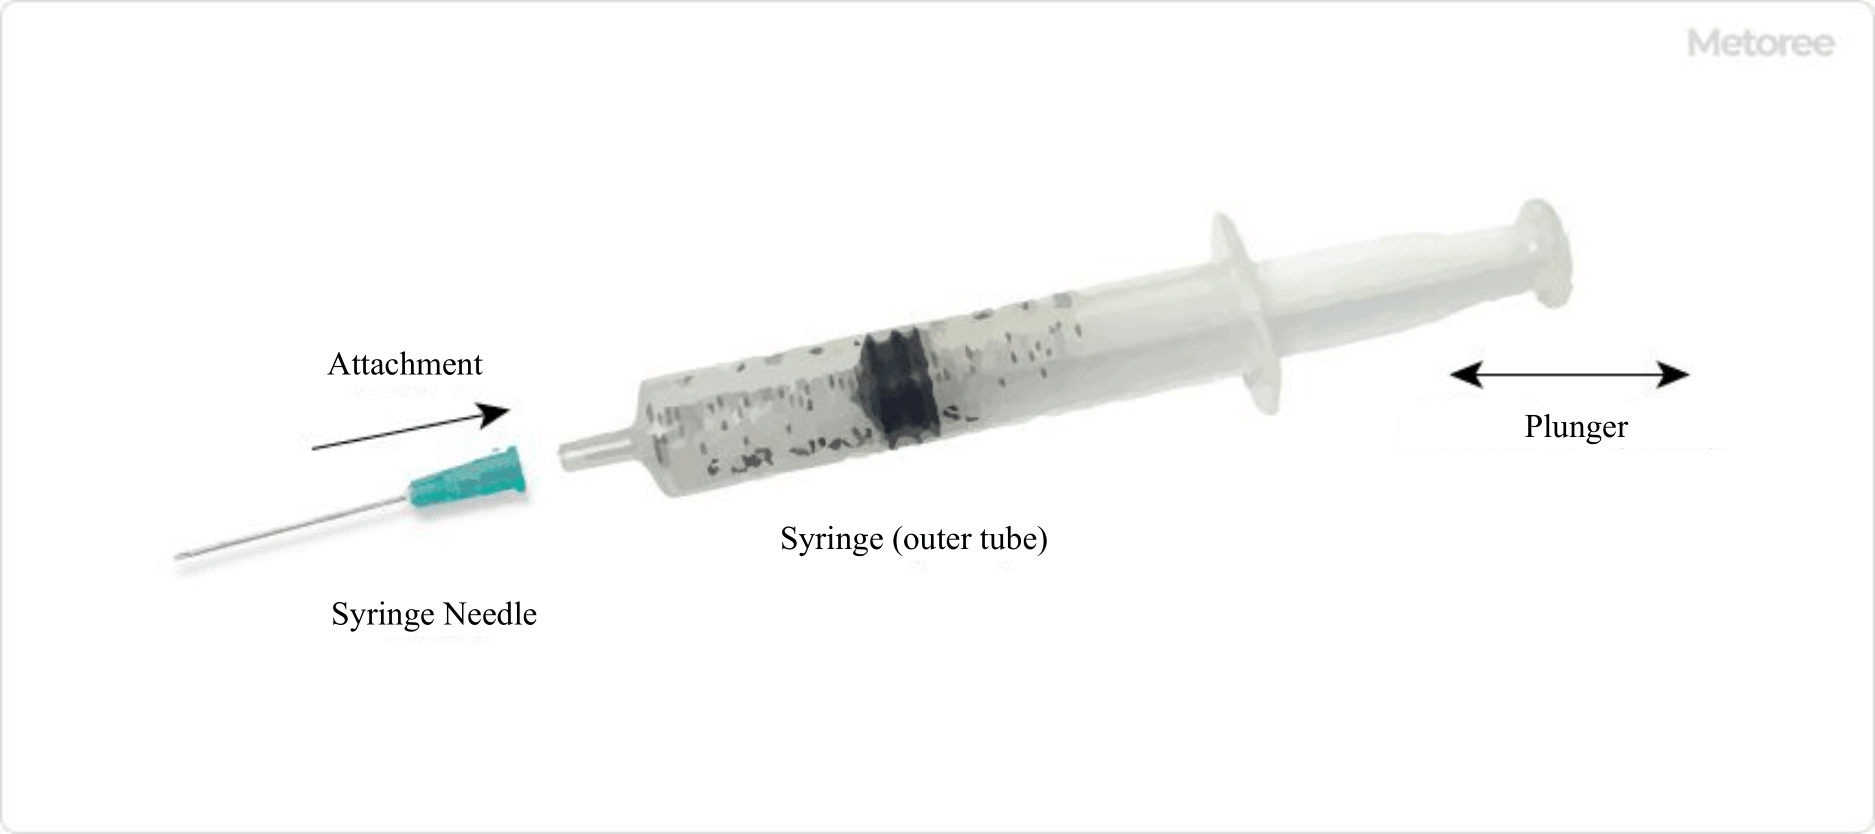 Figure 2. Image of a syringe in use